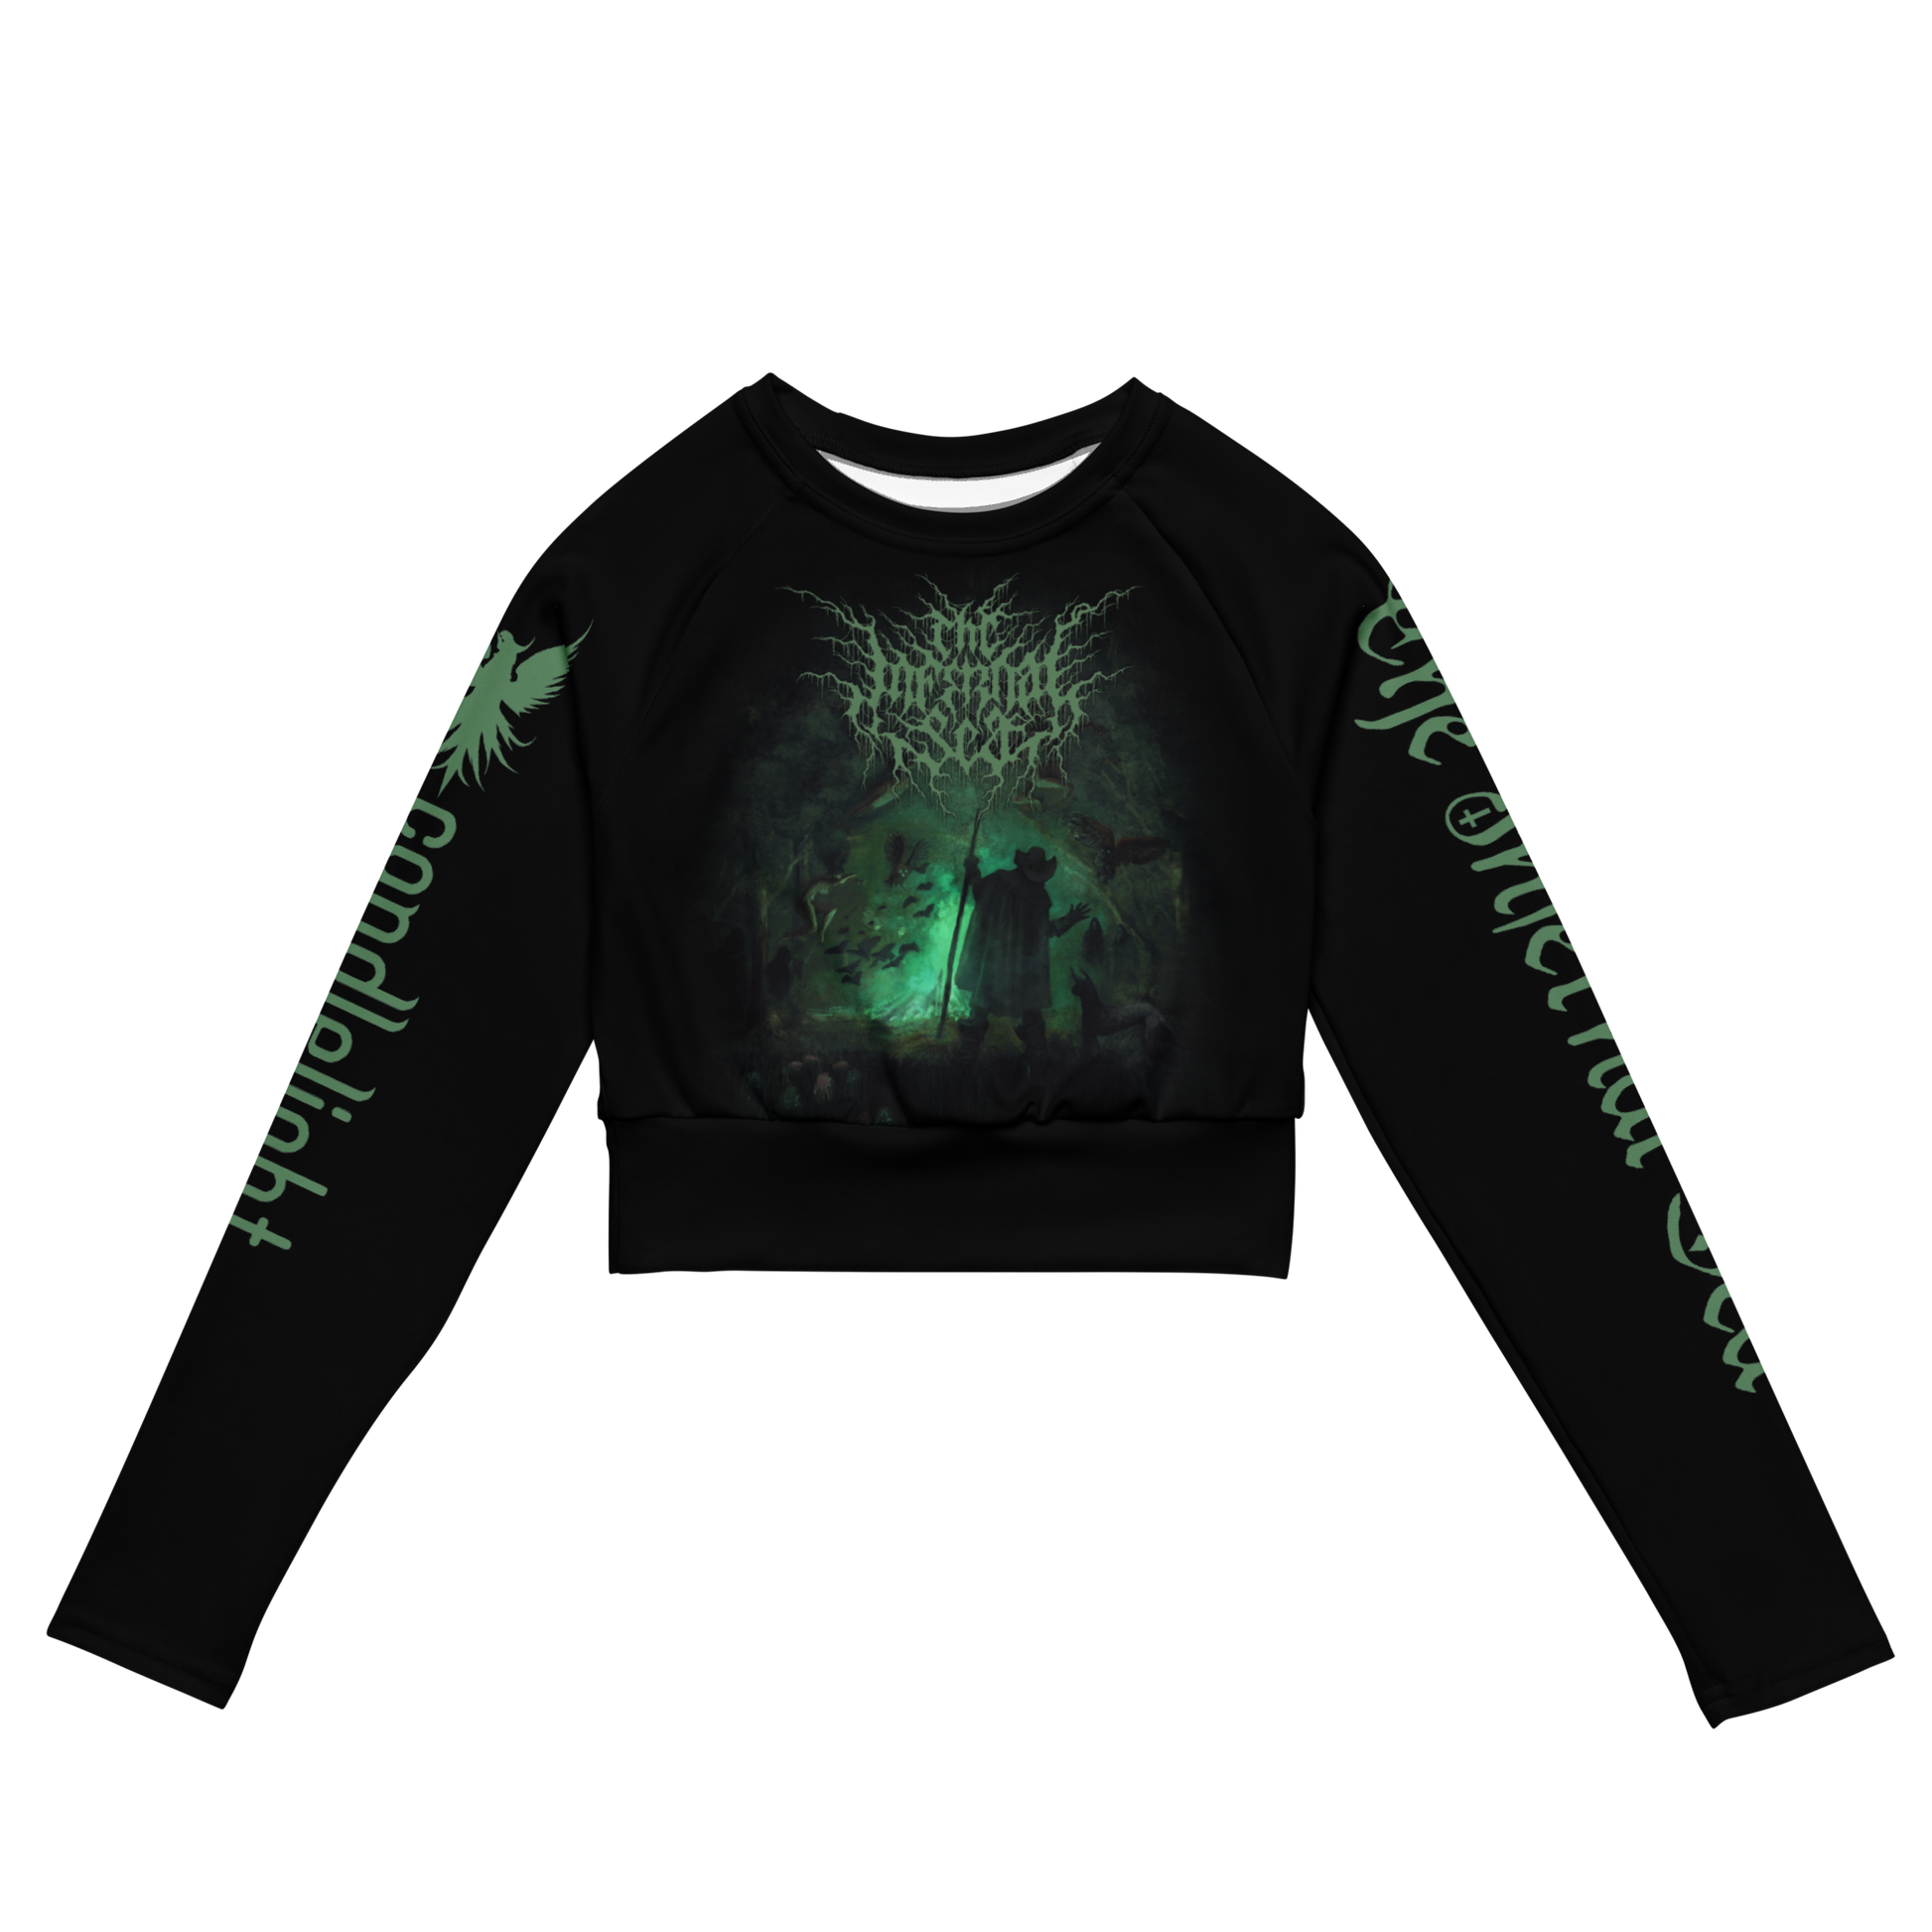 The Infernal Sea - Hellfenlic official long sleeve crop top by Metal Mistress